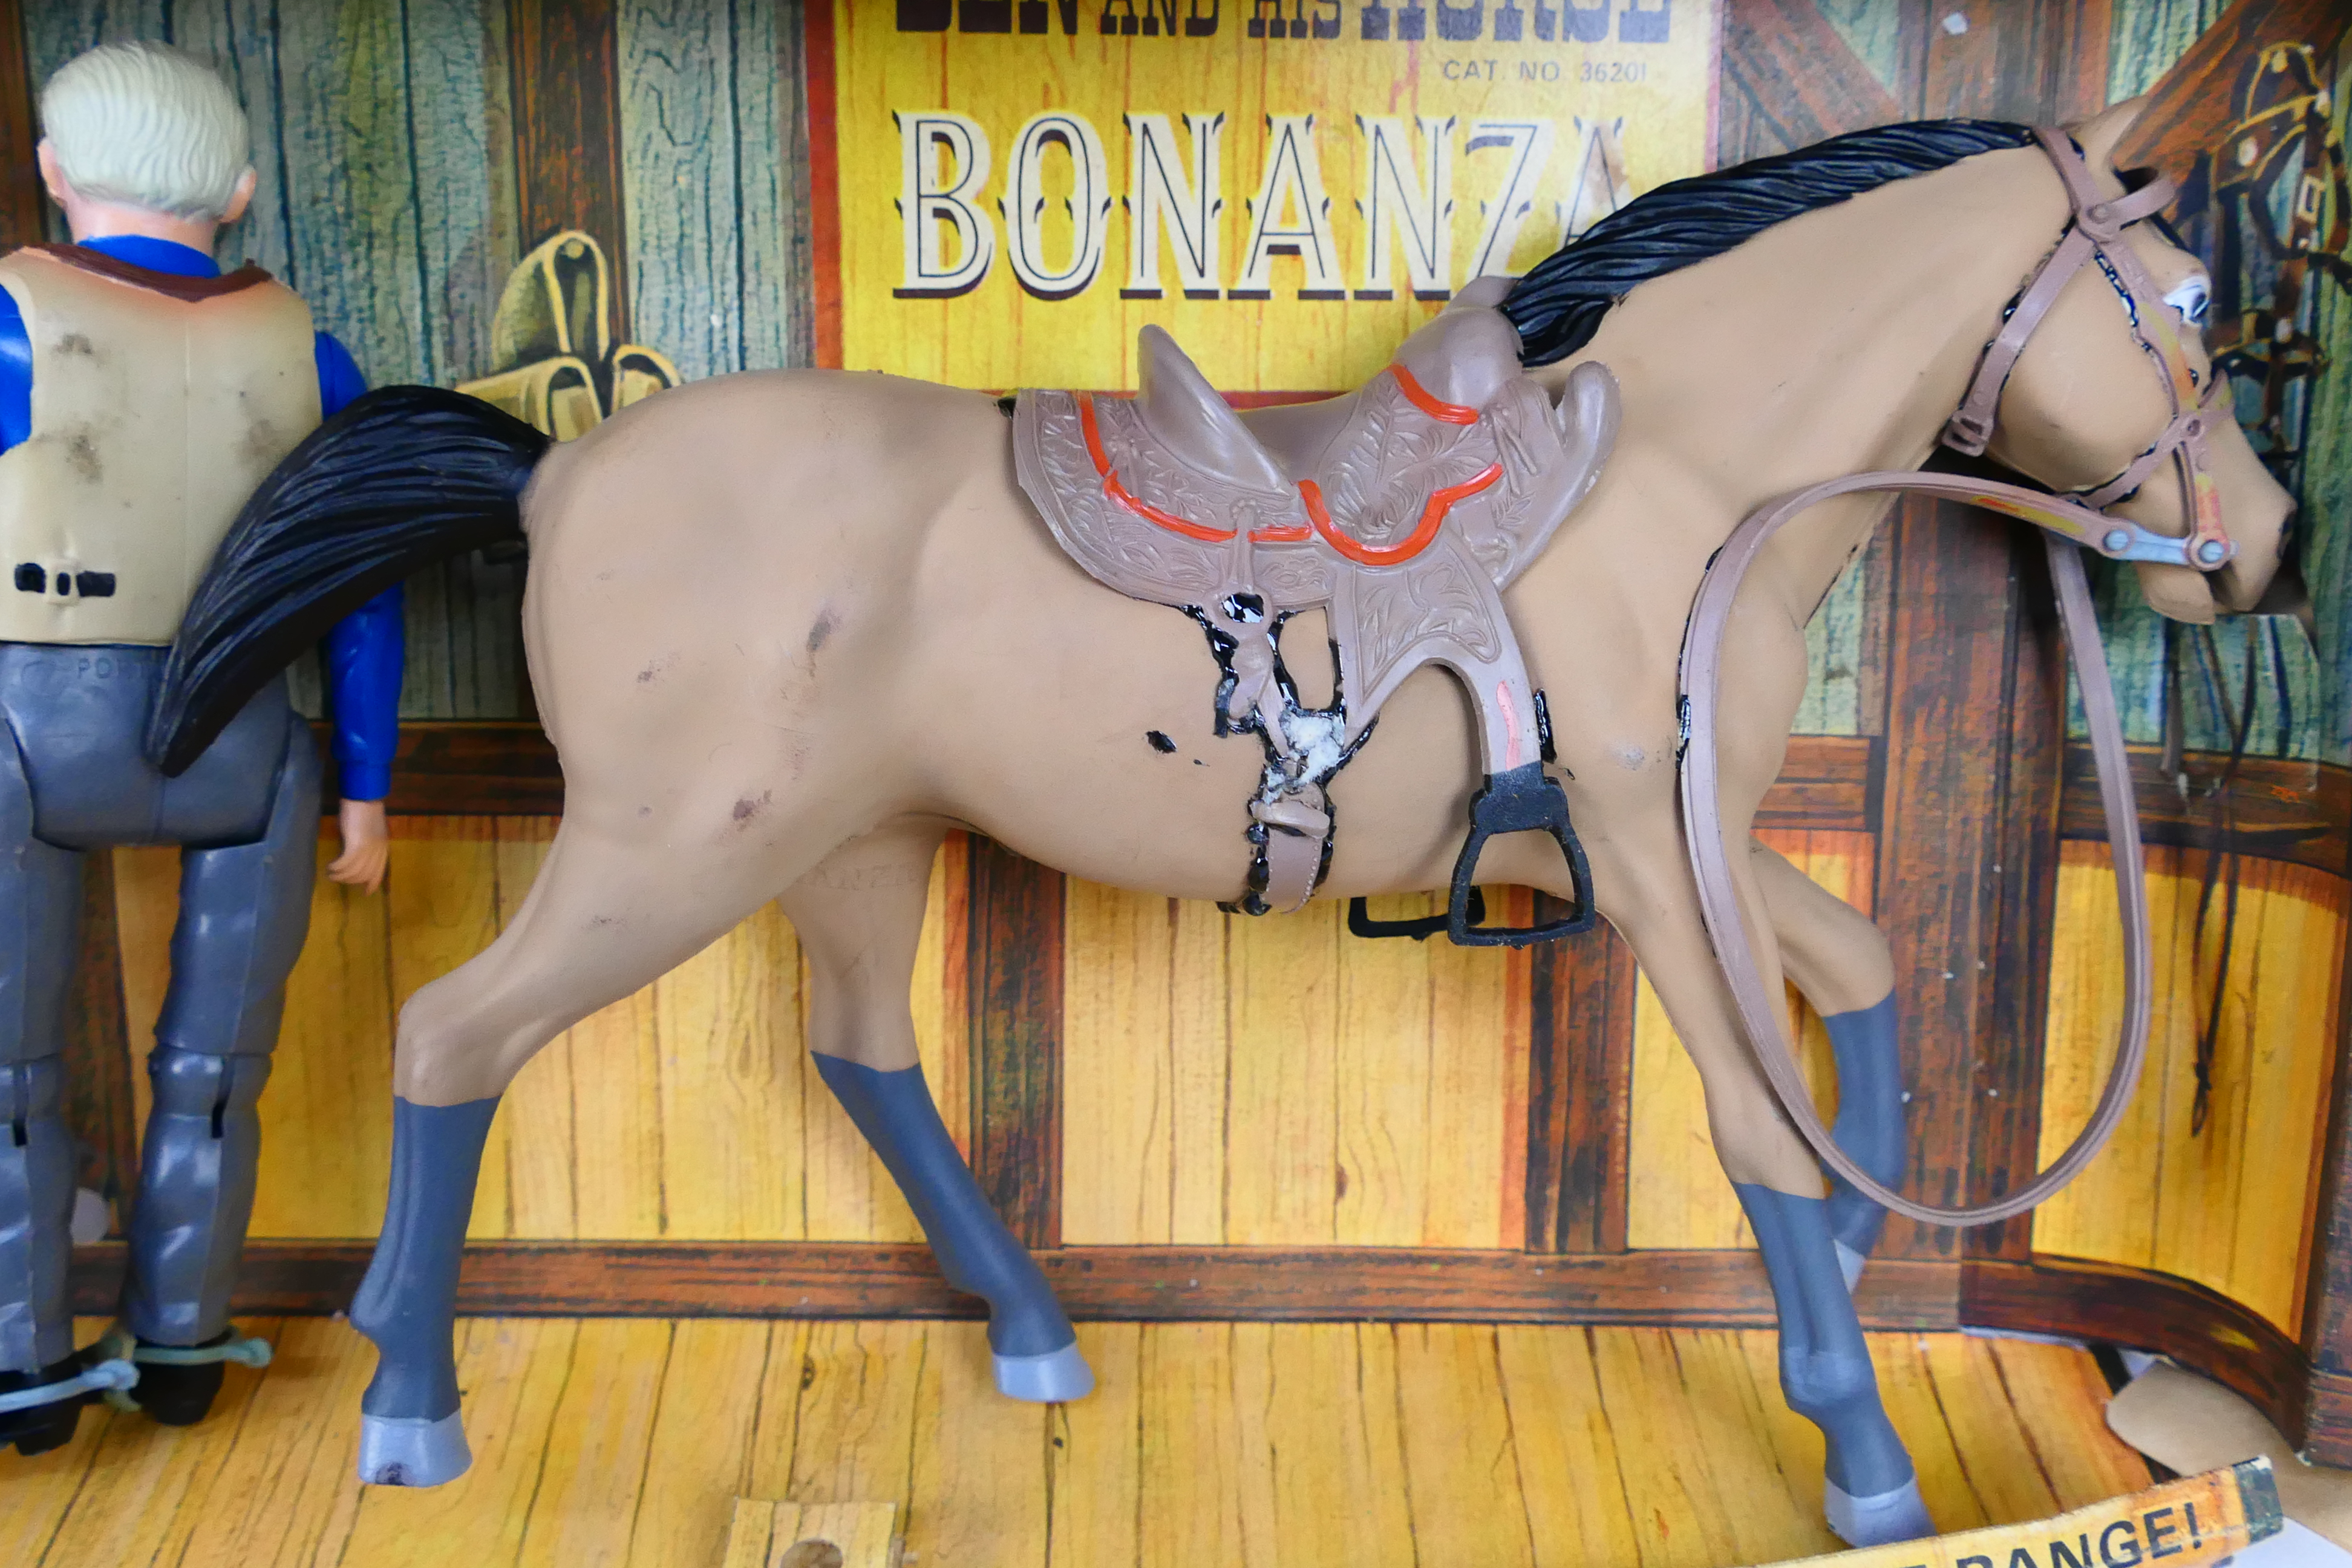 Palitoy - Bonanza - 2 x boxed sets, Ben And His Horse # 36201 and Hoss And His Horse # 36203. - Image 13 of 14